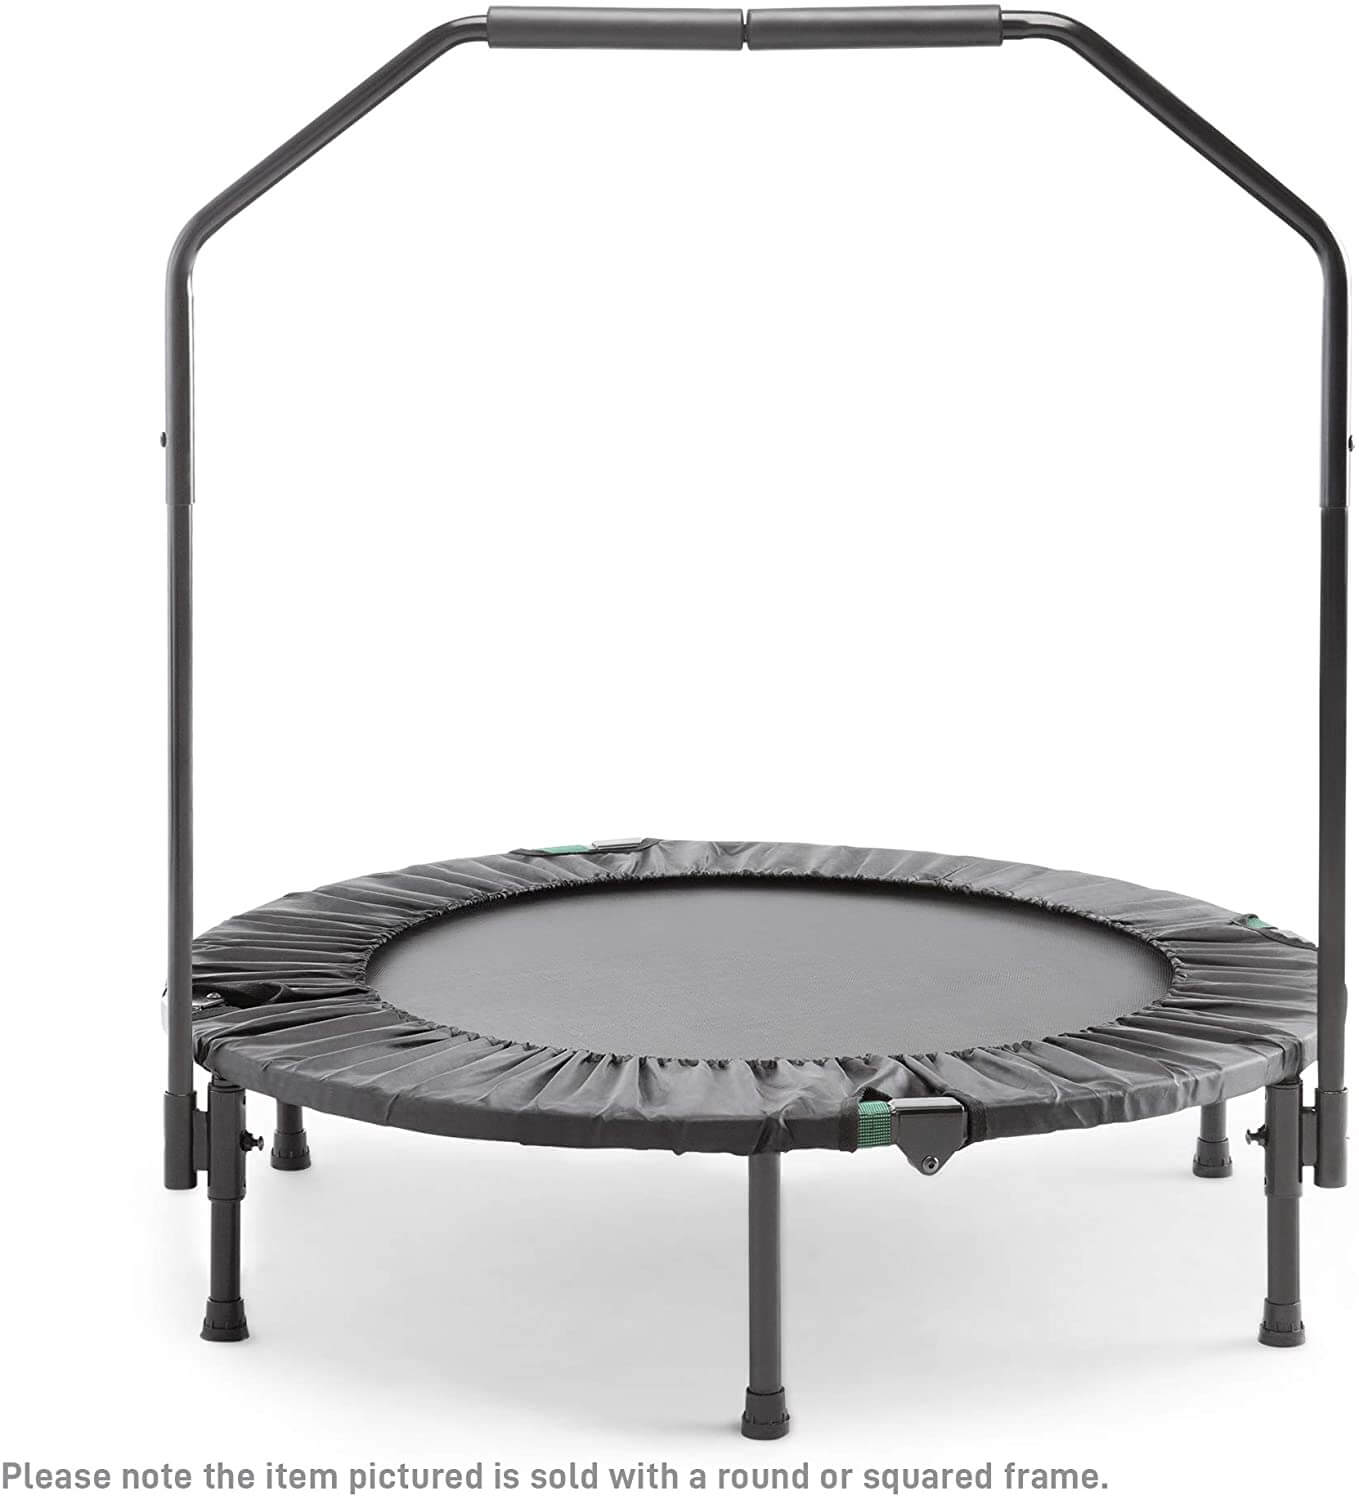 Marcy Mini Trampoline with Handle ASG-40 Review